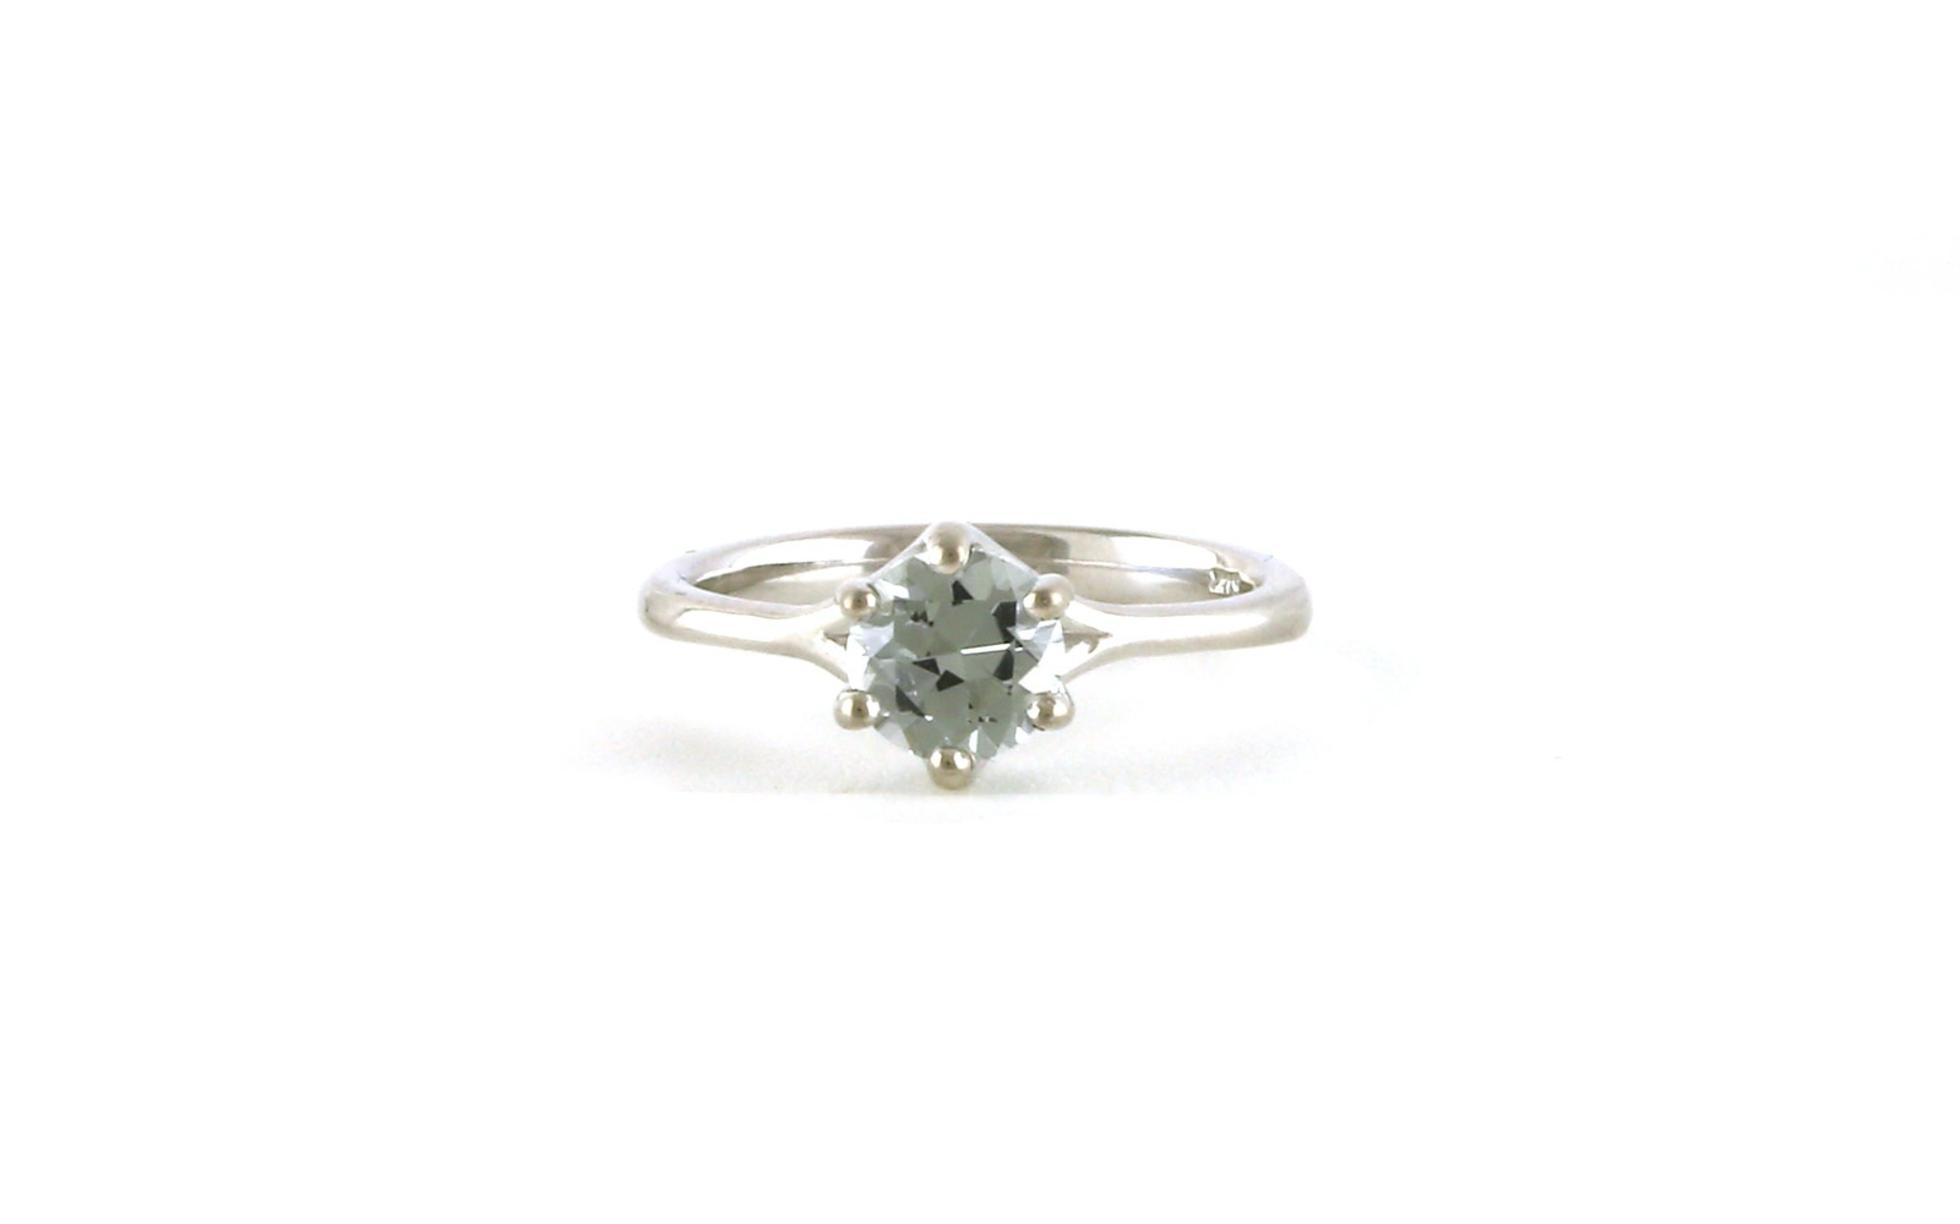 6-Prong Solitaire-style Pale Grey Montana Sapphire Ring in Platinum (1.11cts)